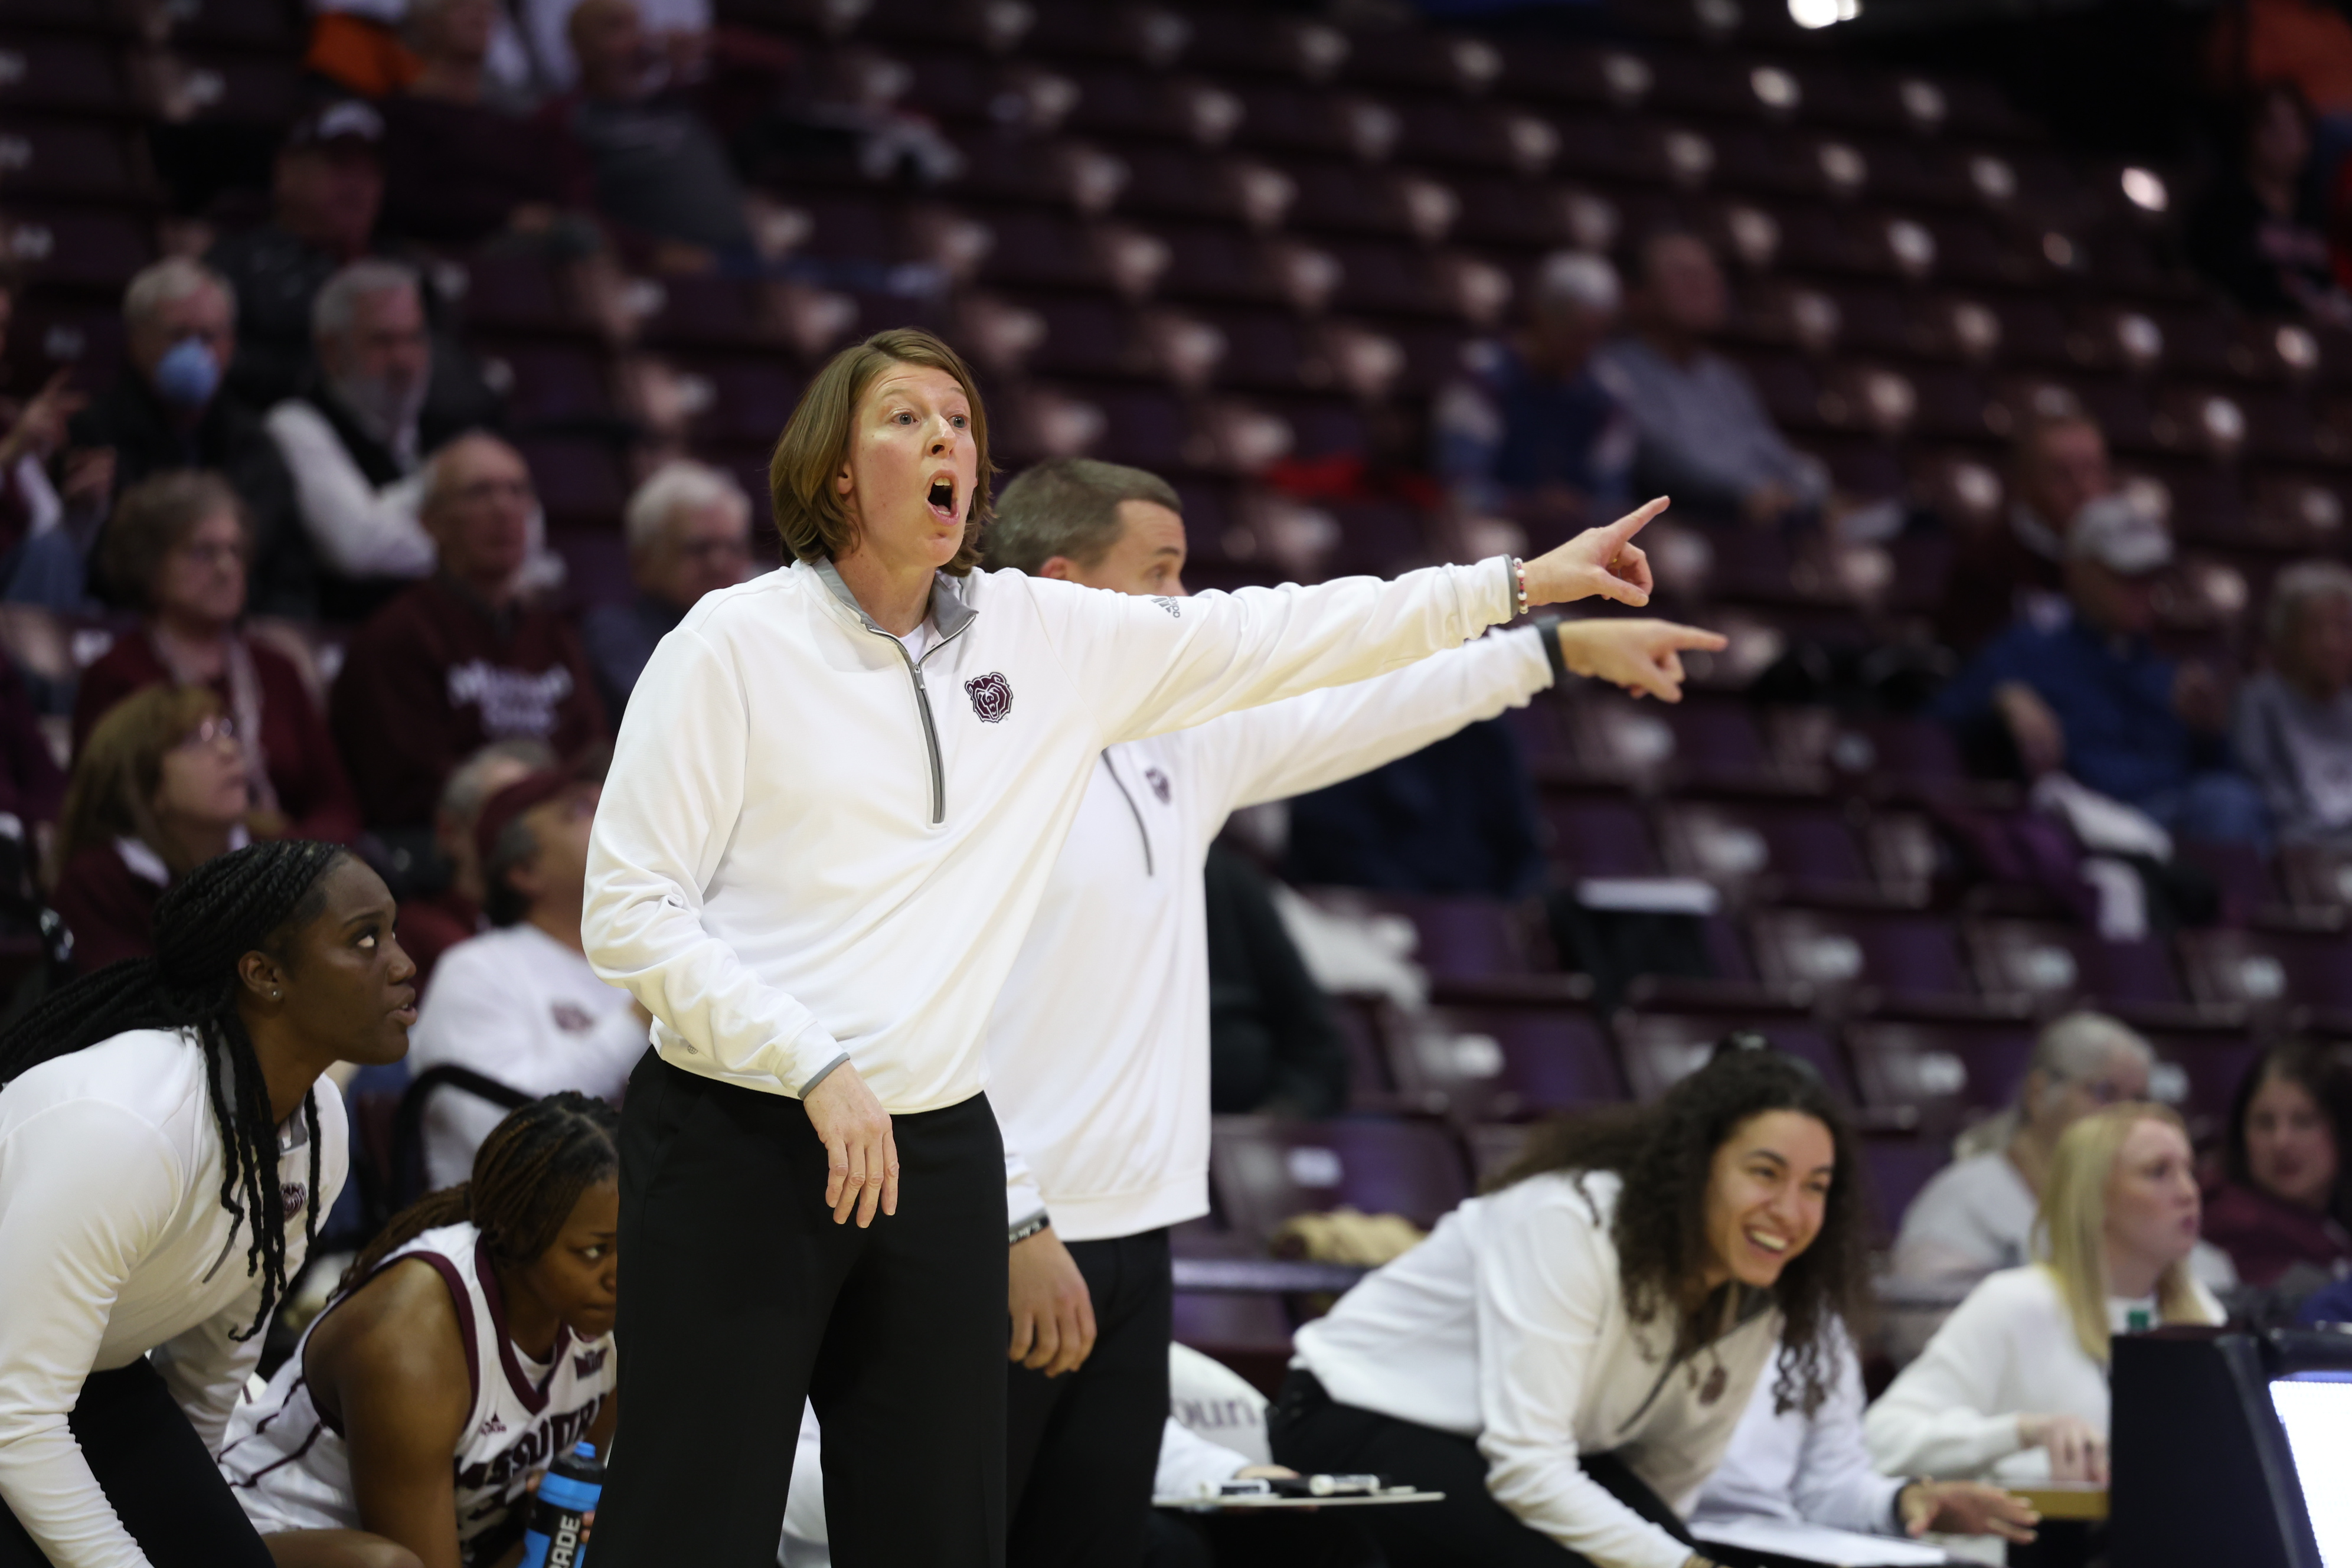 A female basketball coach shouts instructions to her team.